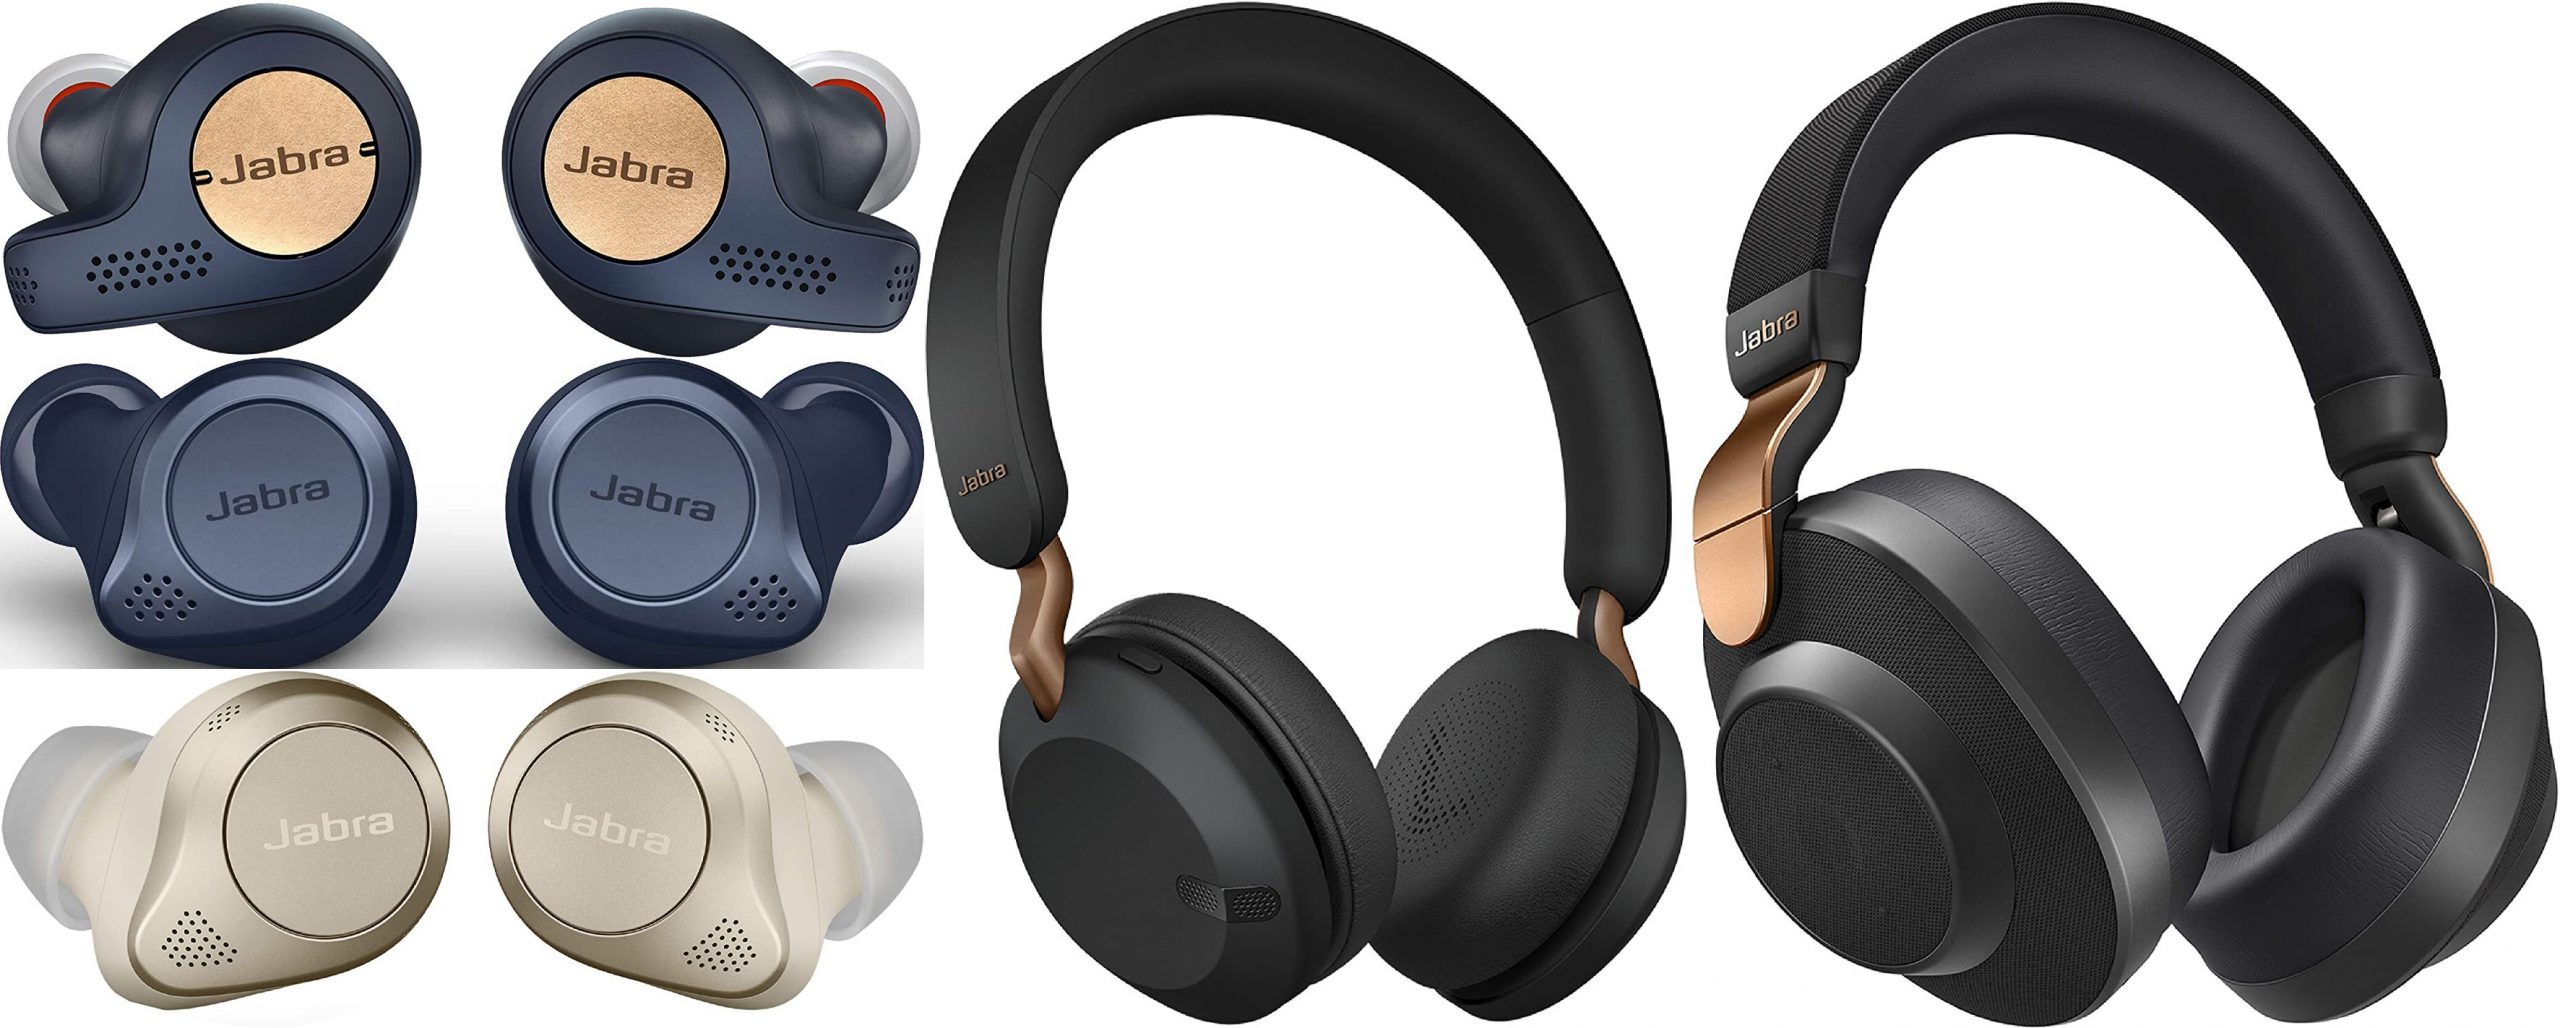 Jabra’s Elite headphones and true wireless earbuds are as low as $47 for Prime Day